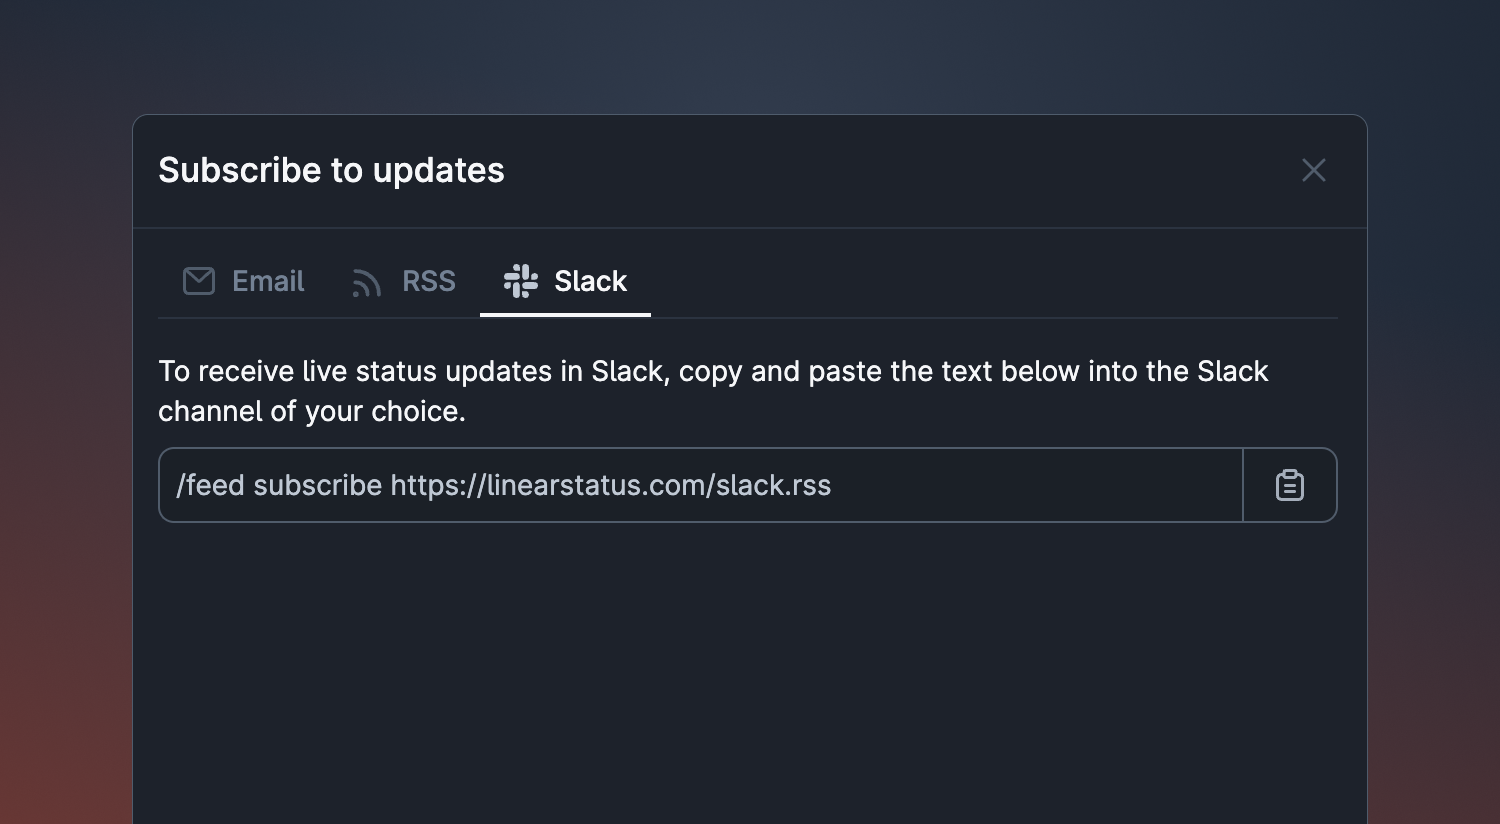 Subscribing to status page updates in Slack